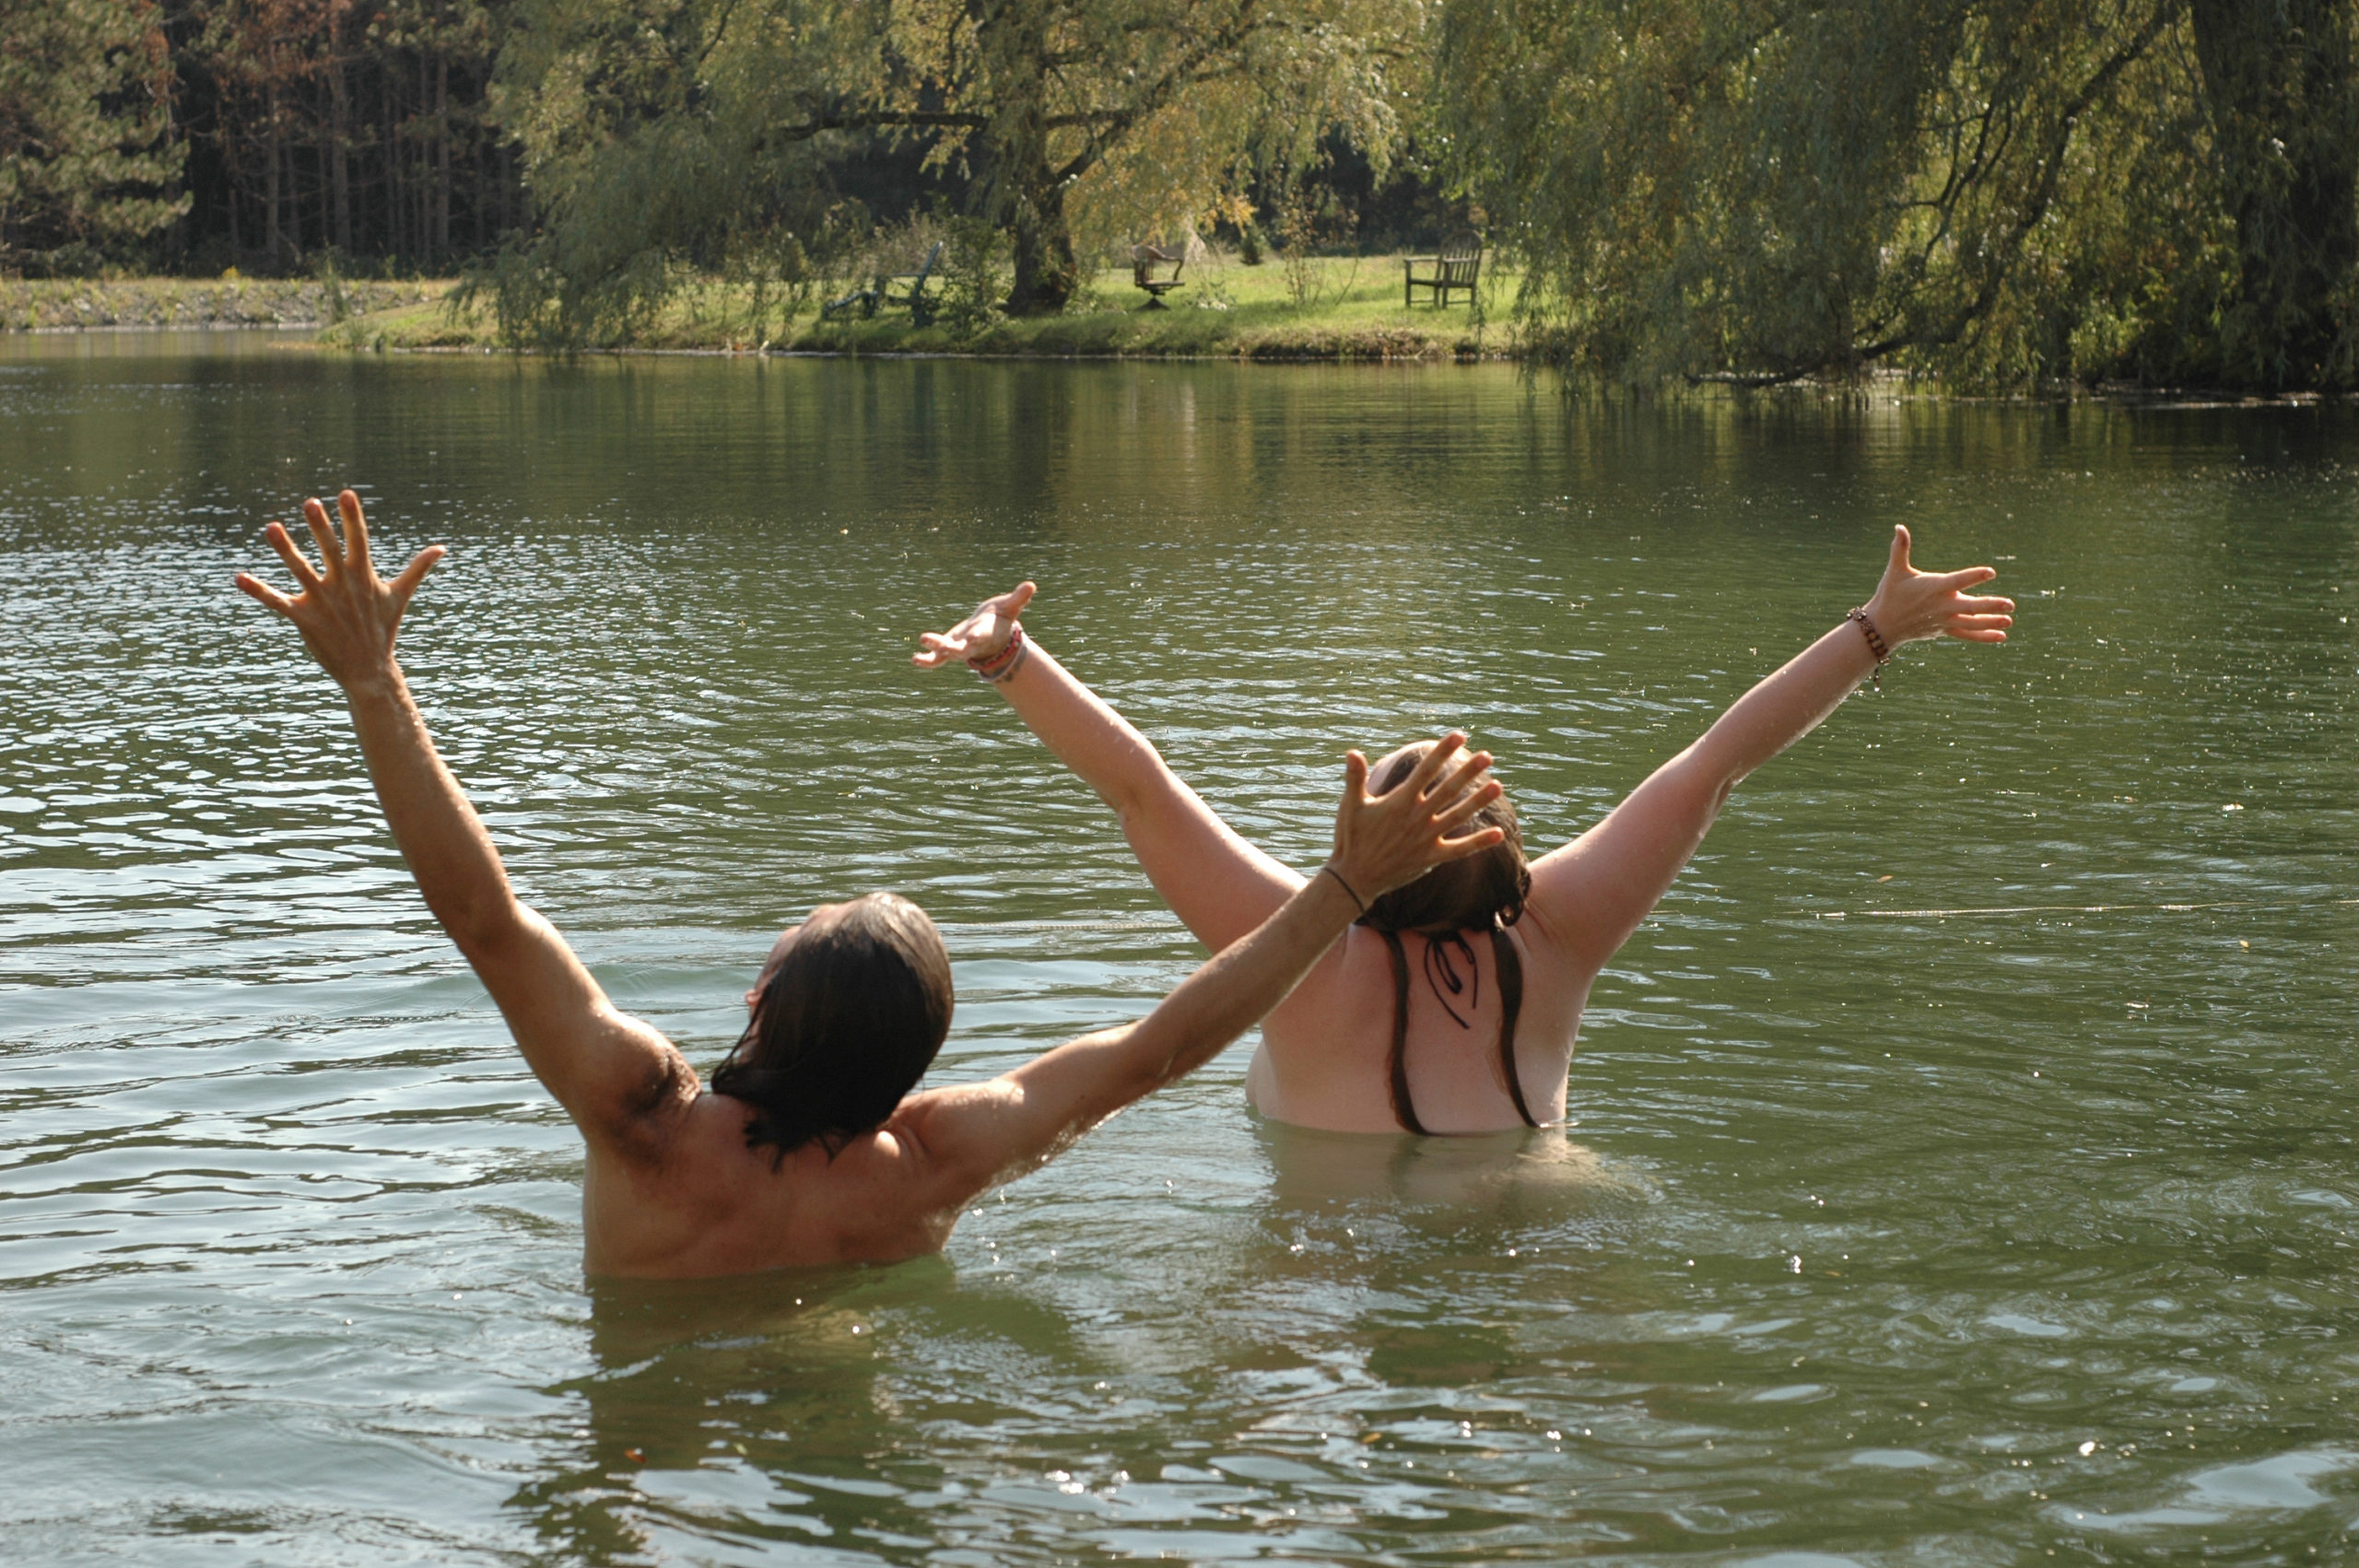 Here's the Skinny on Skinny Dipping